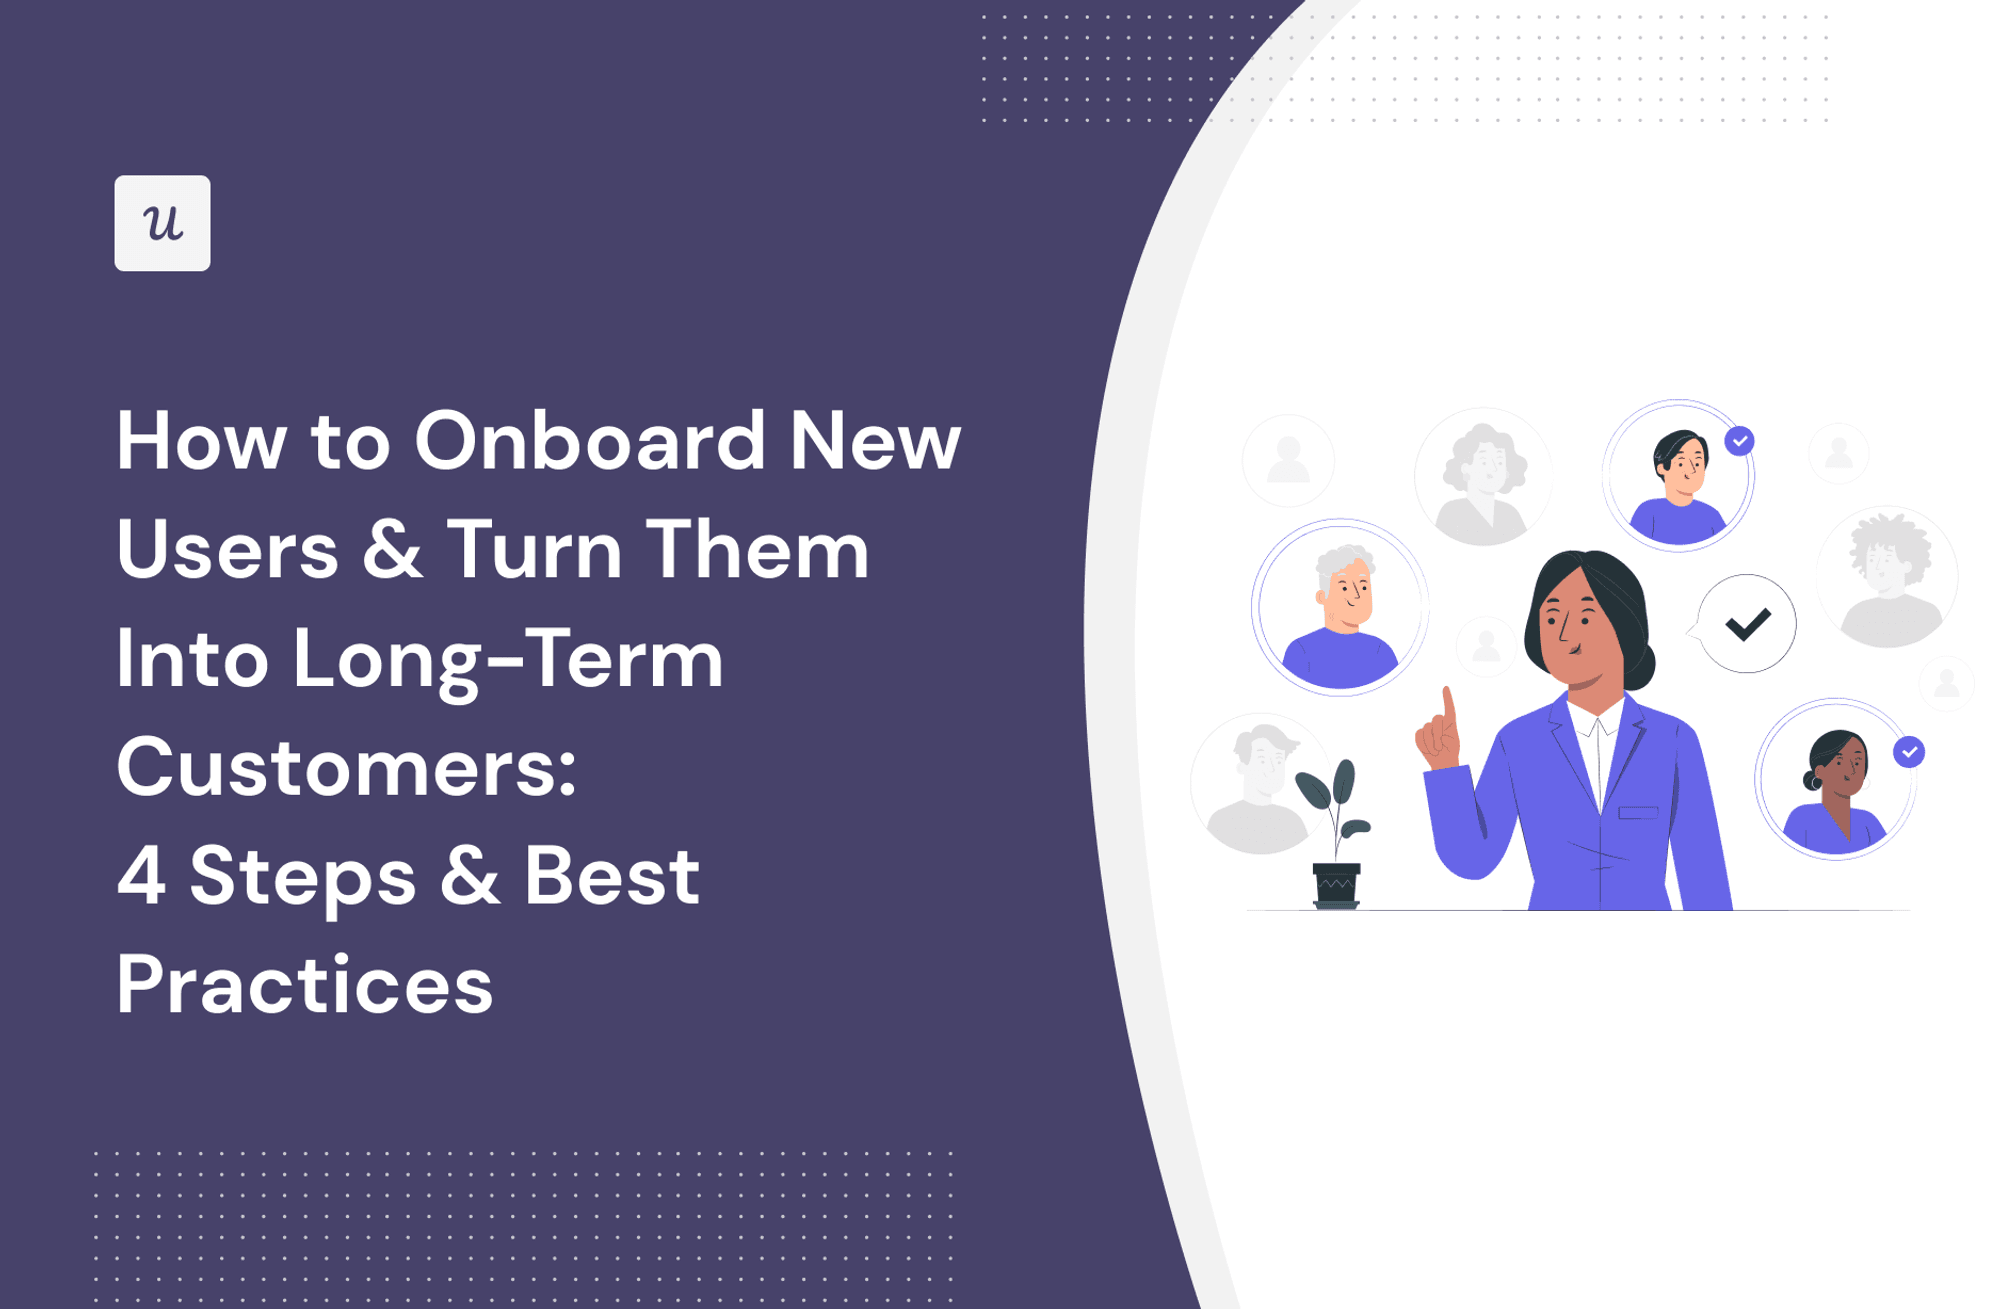 How to Onboard New Users & Turn Them Into Long-Term Customers: 4 Steps & Best Practices cover